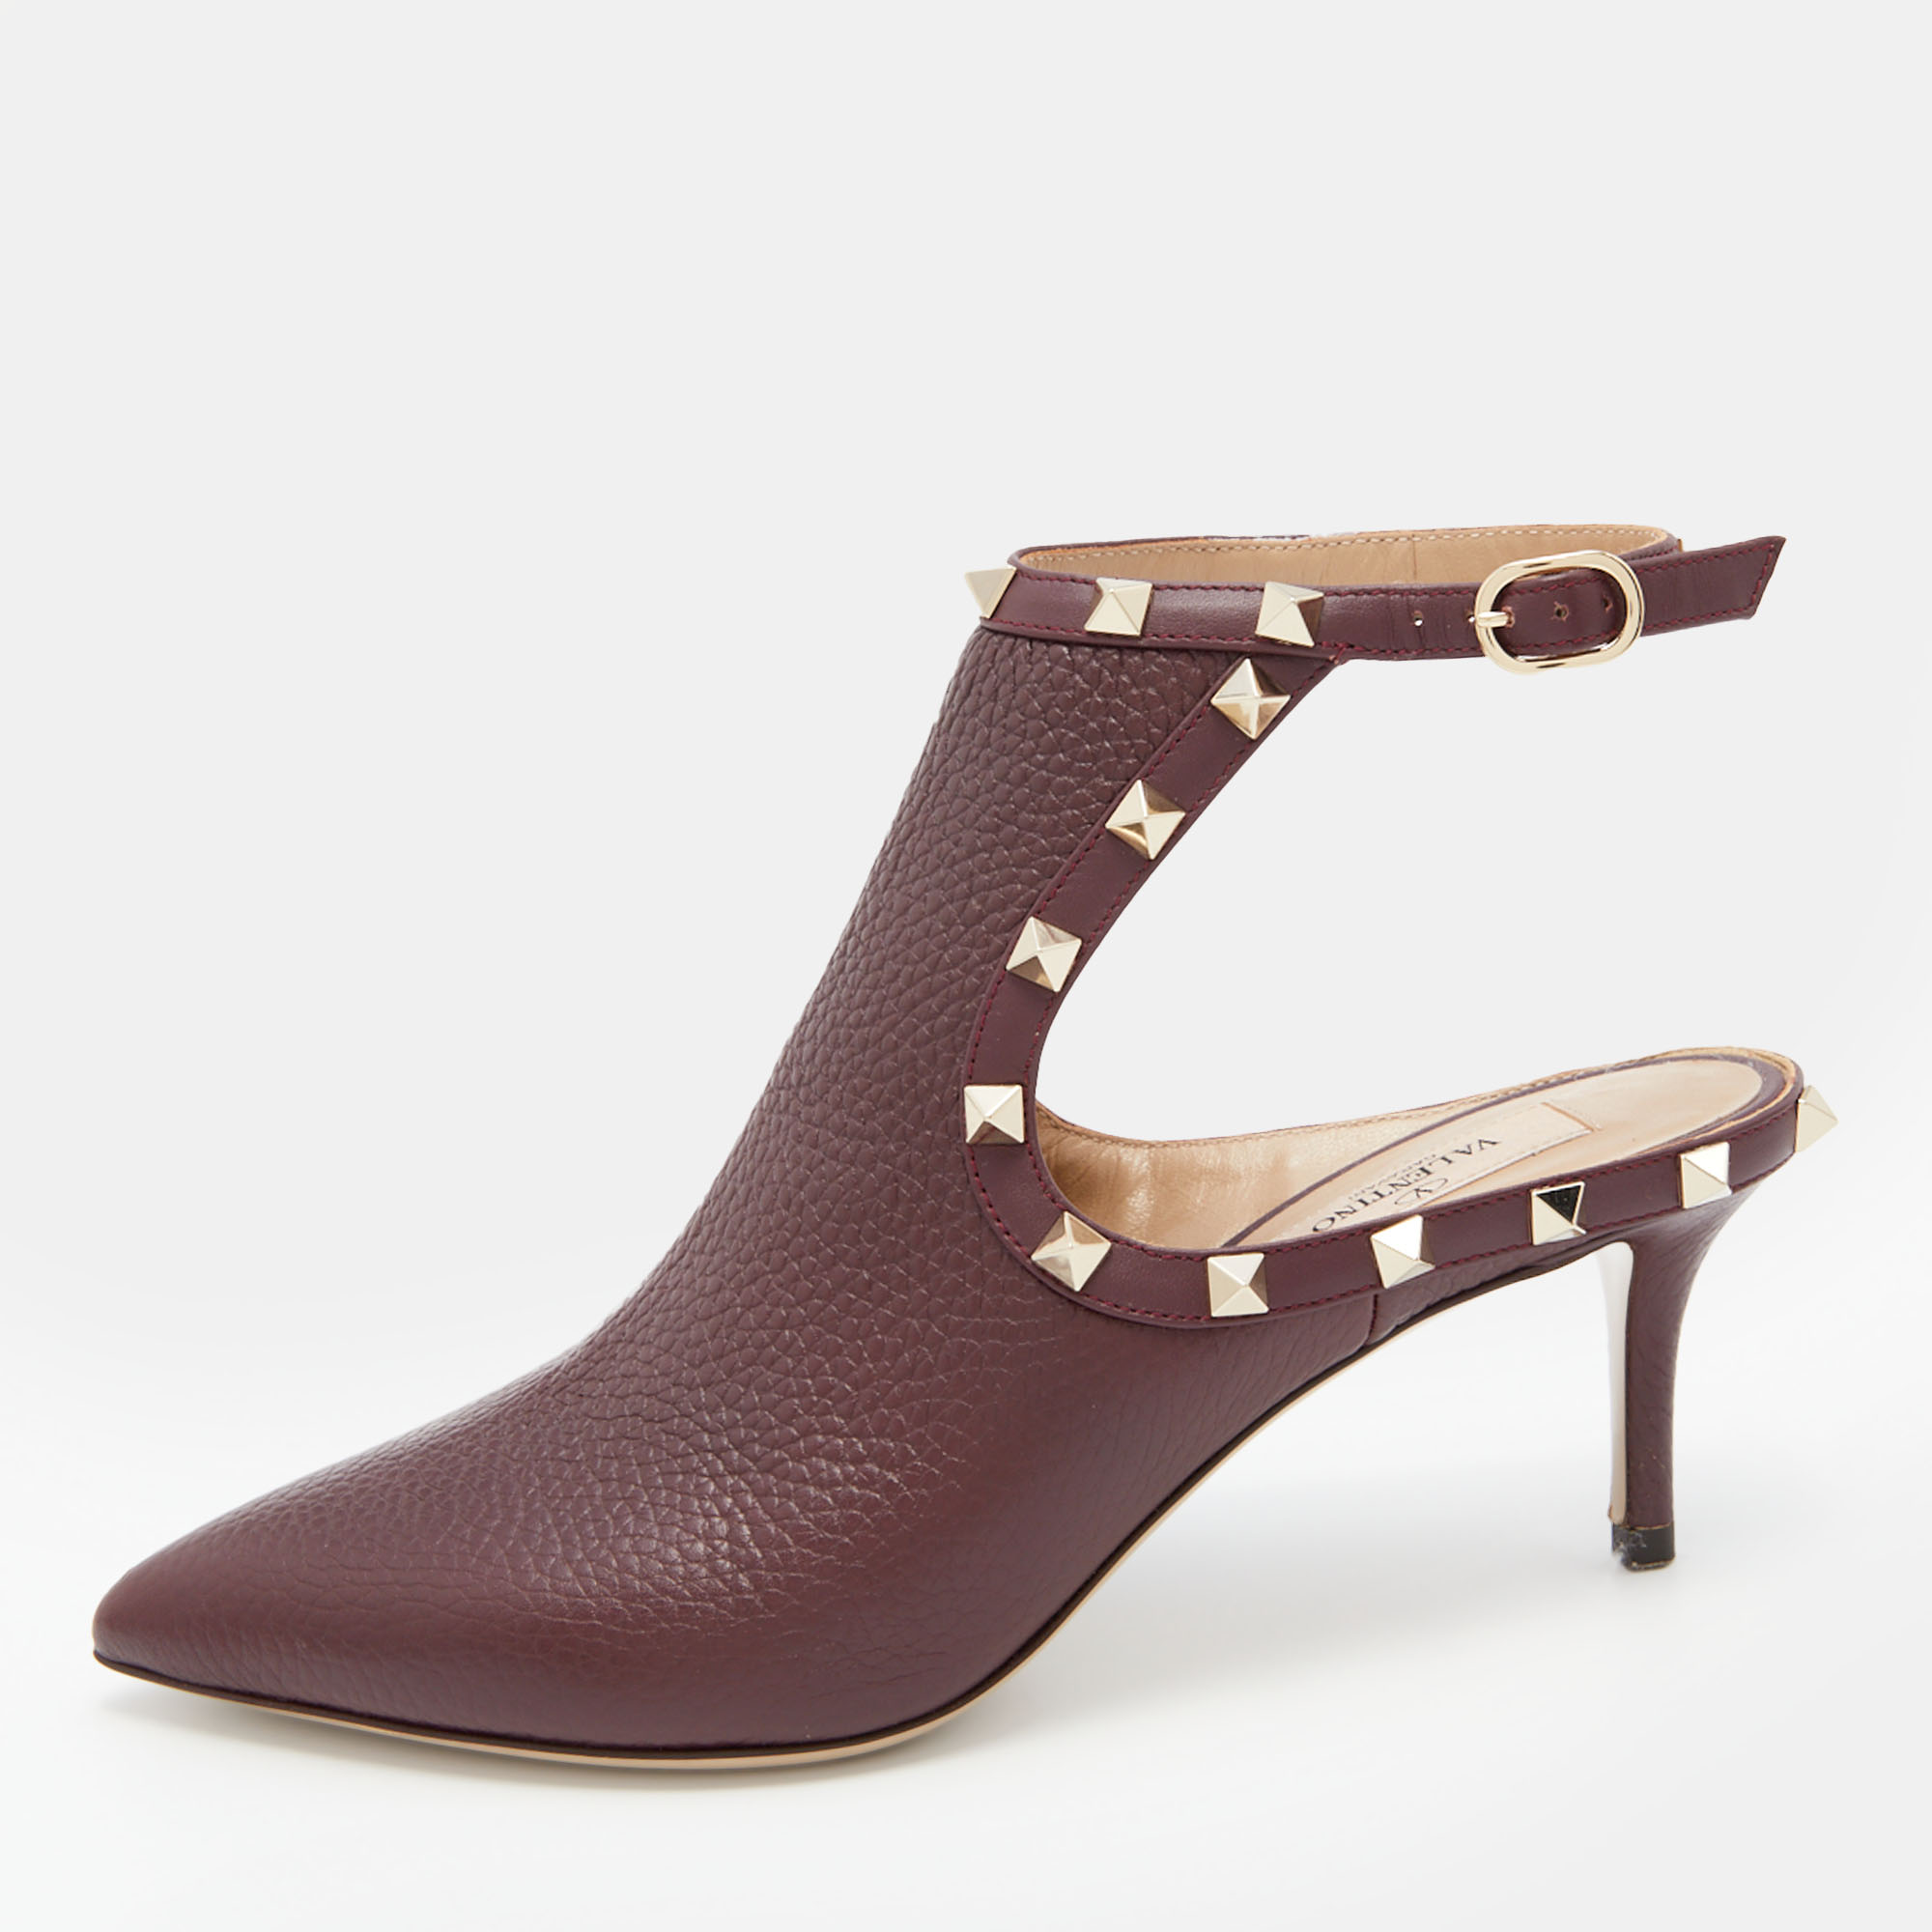 Pre-owned Valentino Garavani Burgundy Leather Rockstud Cutout Pointed Toe Ankle Boots Size 36.5